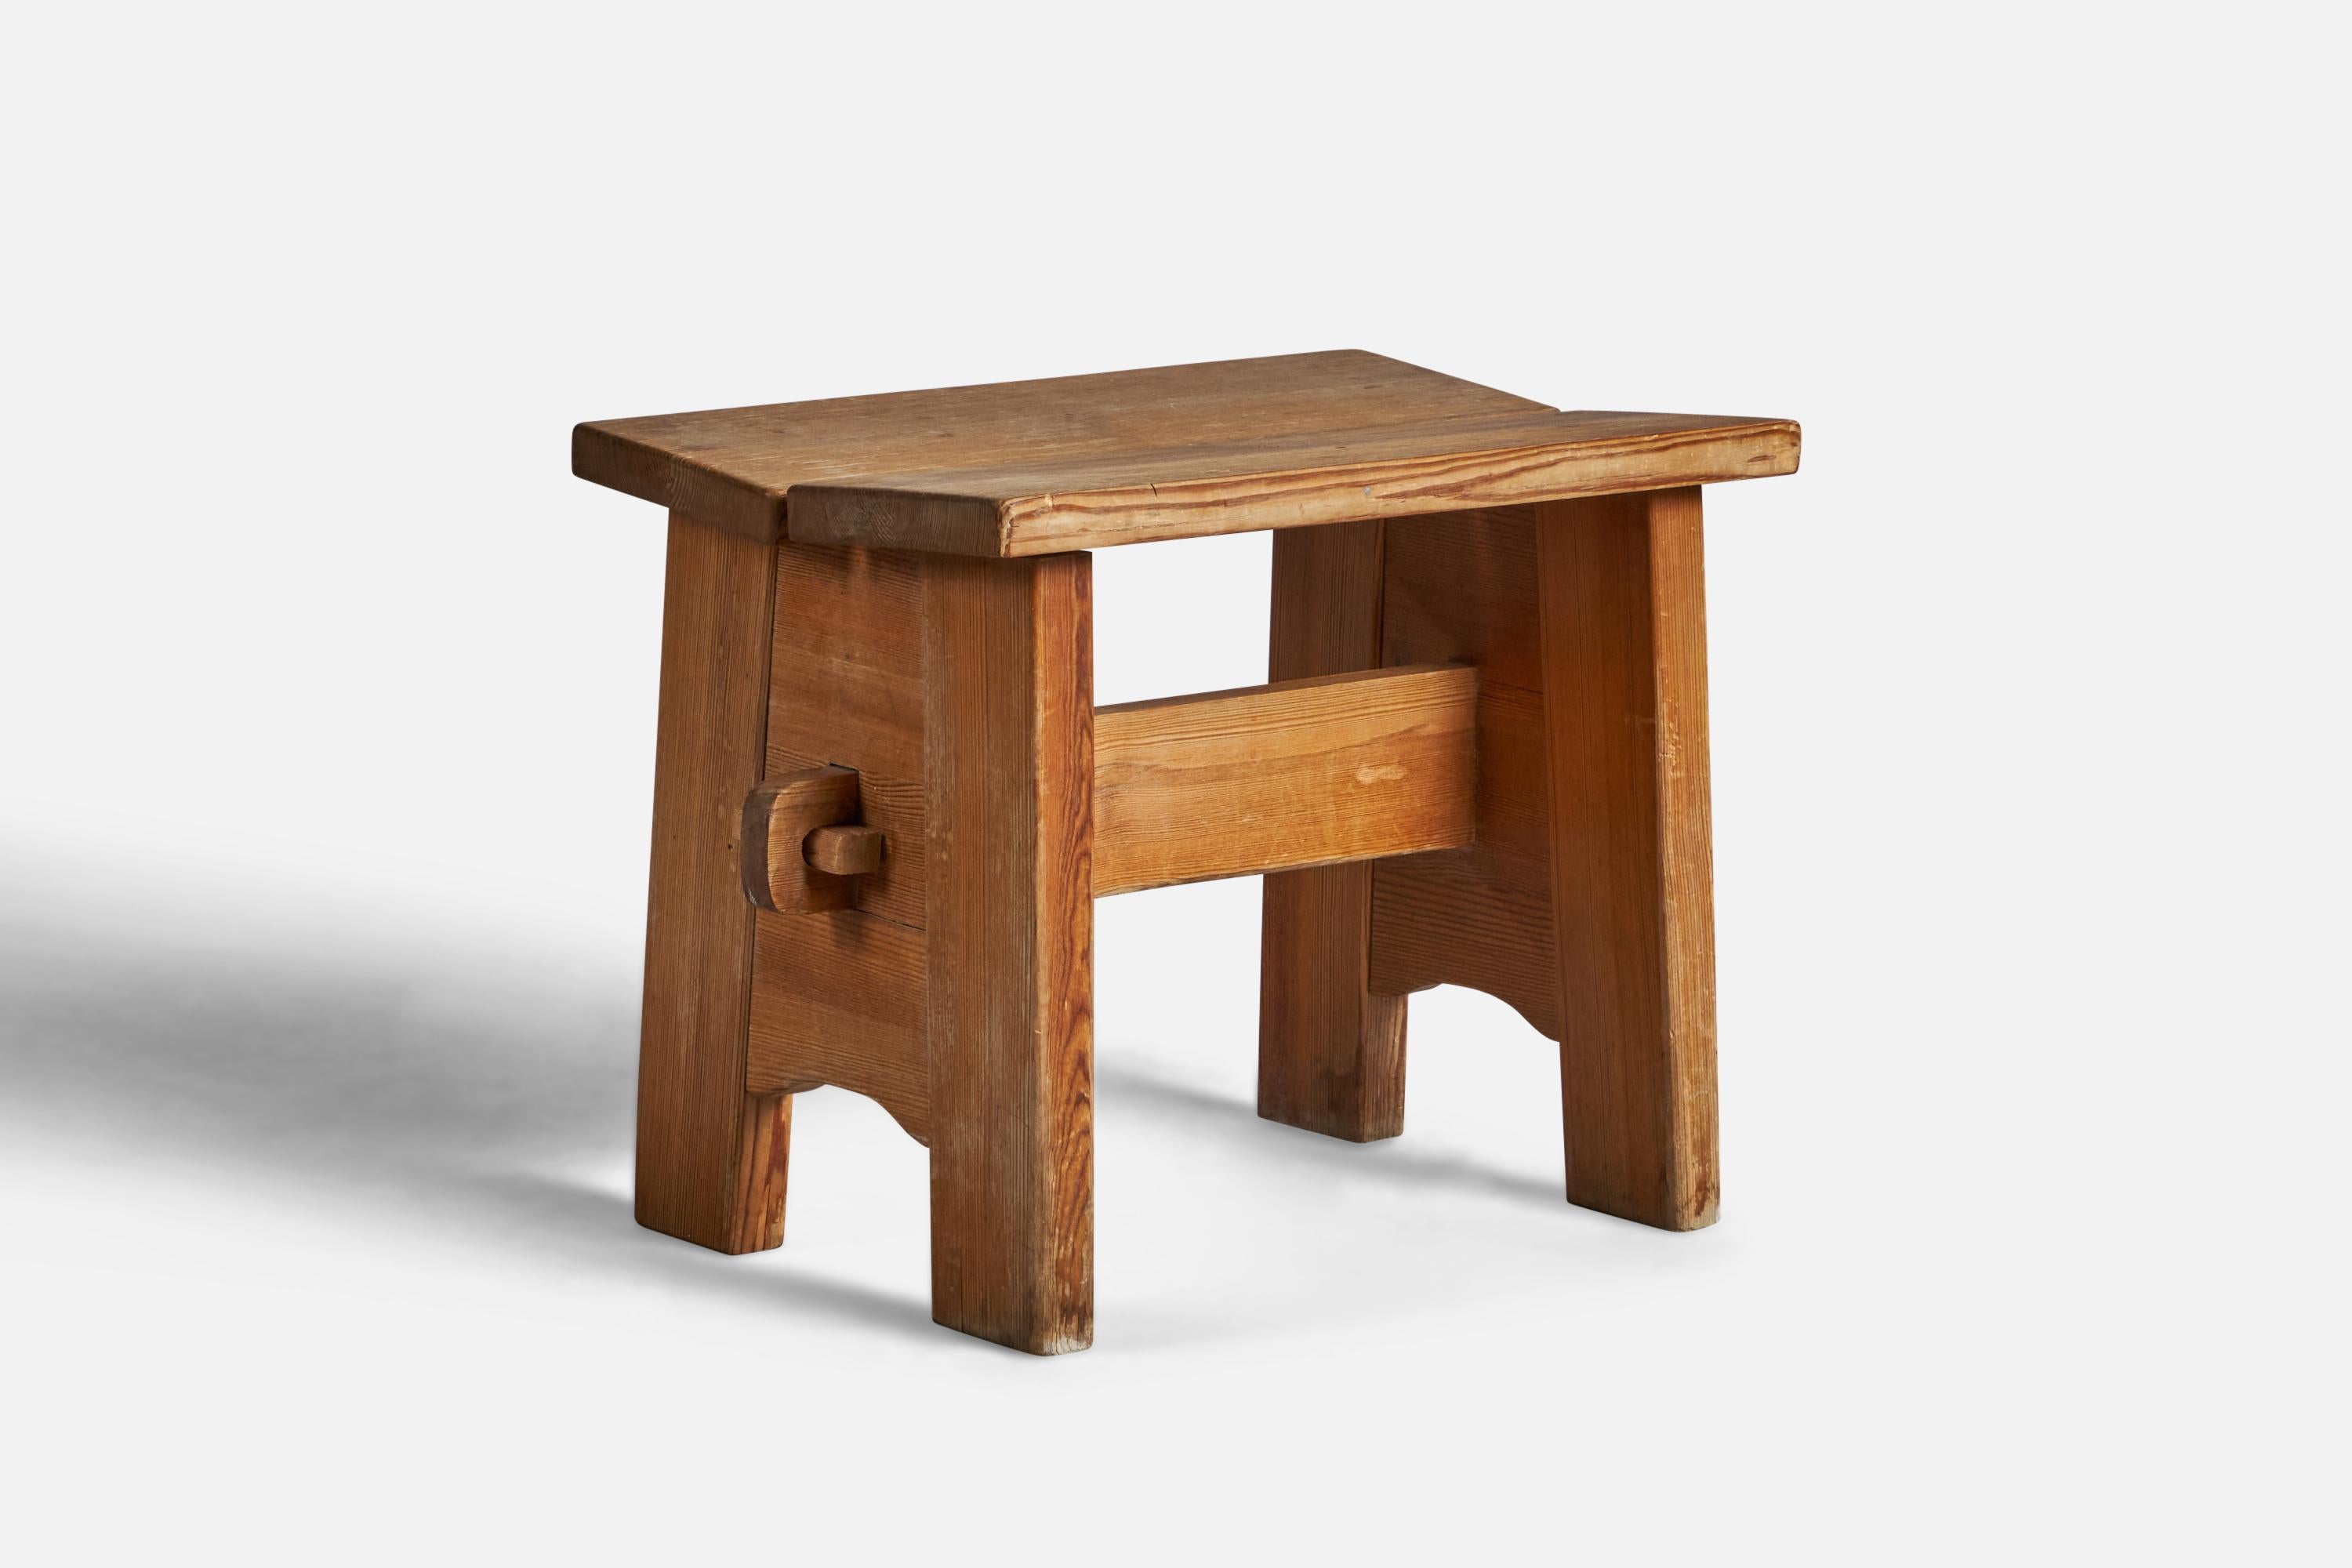 A solid pine stool, designed by David Rosén and produced by Nordiska Kompaniet, c. 1940s.

